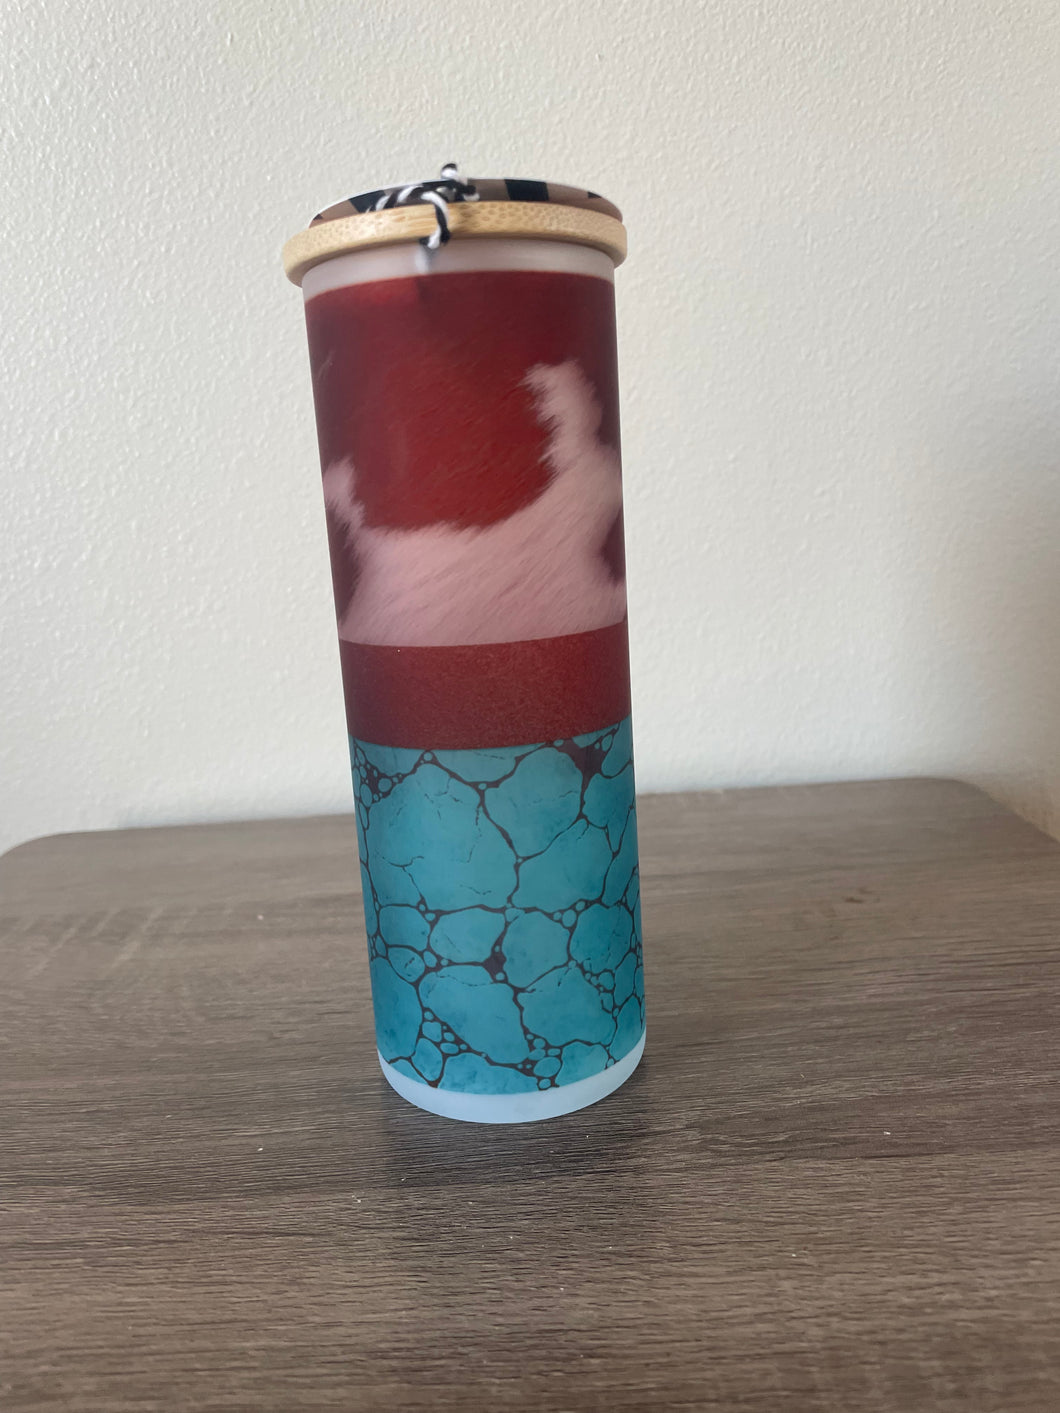 Cow hide and turquoise glass tumbler